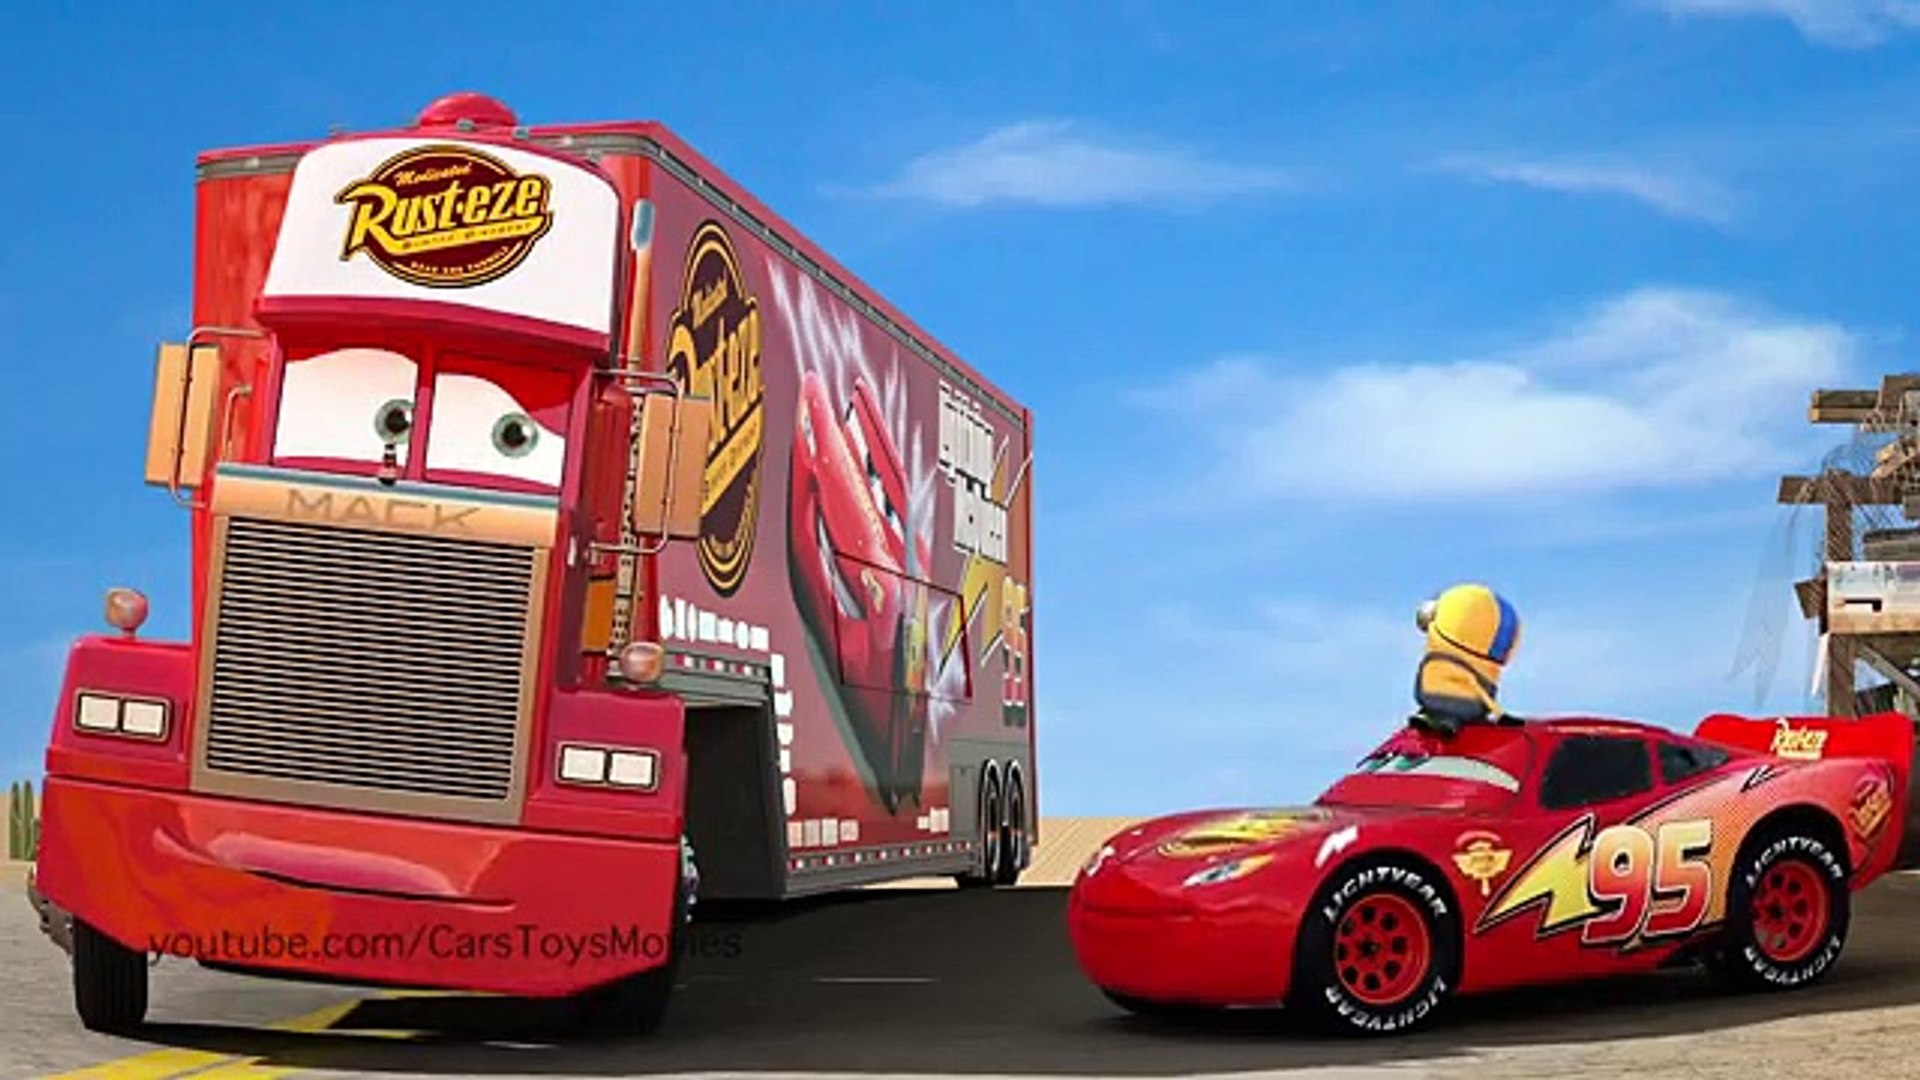 The Disney Pixar Cars Pit Stop Is Back! Kate Shelby | clube.zeros.eco